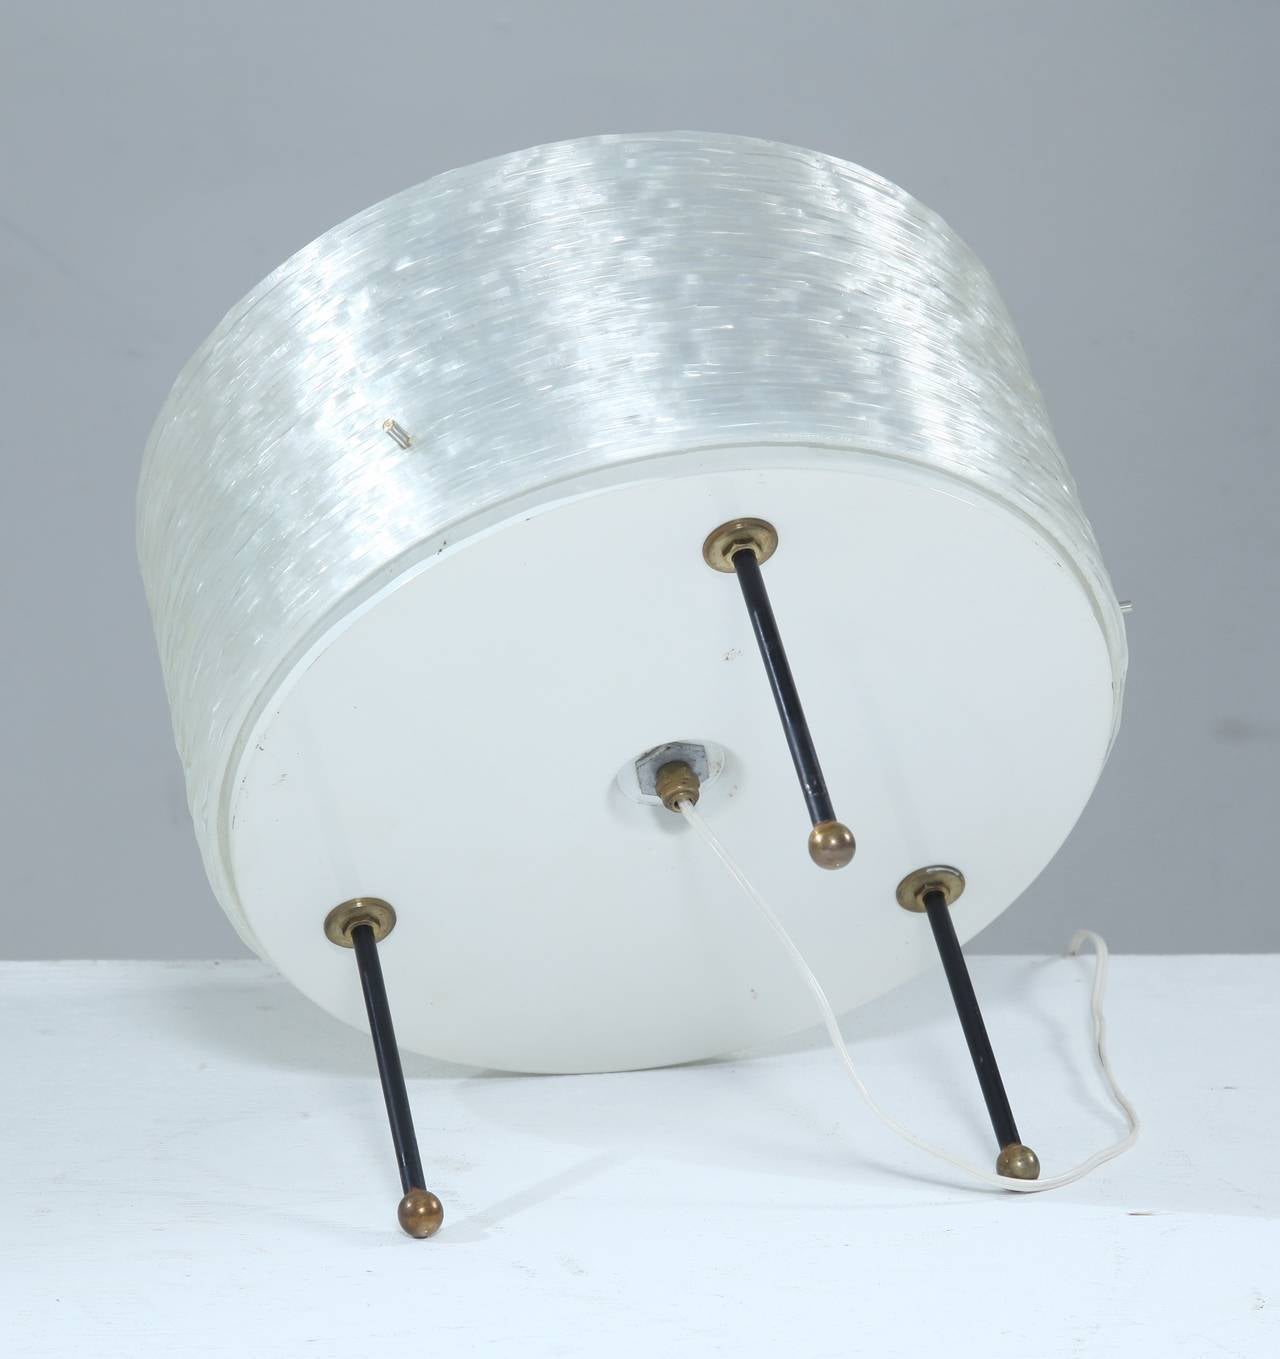 A round French table lamp on three small metal legs with brass feet, attributed to Arlus. The lamp is made of ribbed Perspex with a plexiglass diffuser on top, for a beautiful, atmospheric light distribution.
The lamp holds three light bulbs and is